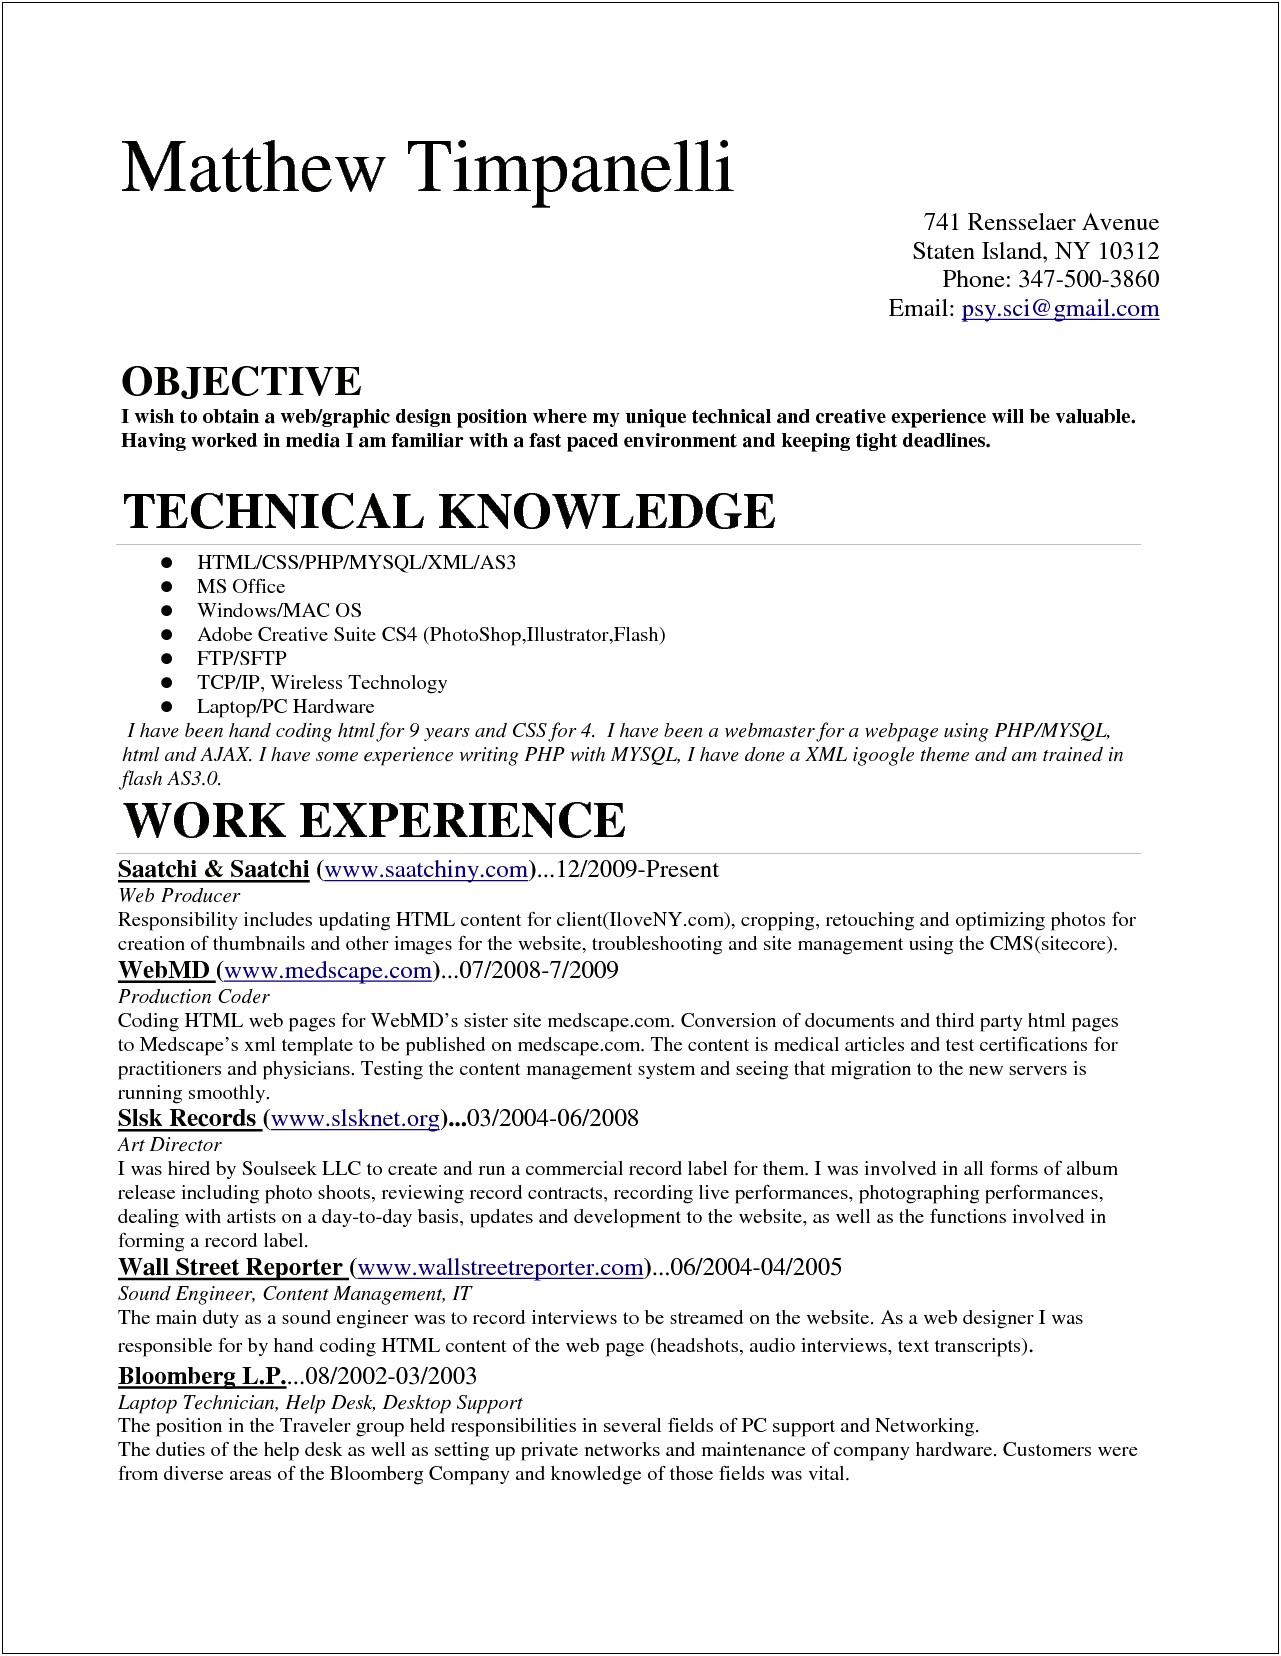 Medical Billing And Coding Specialist Resume Sample